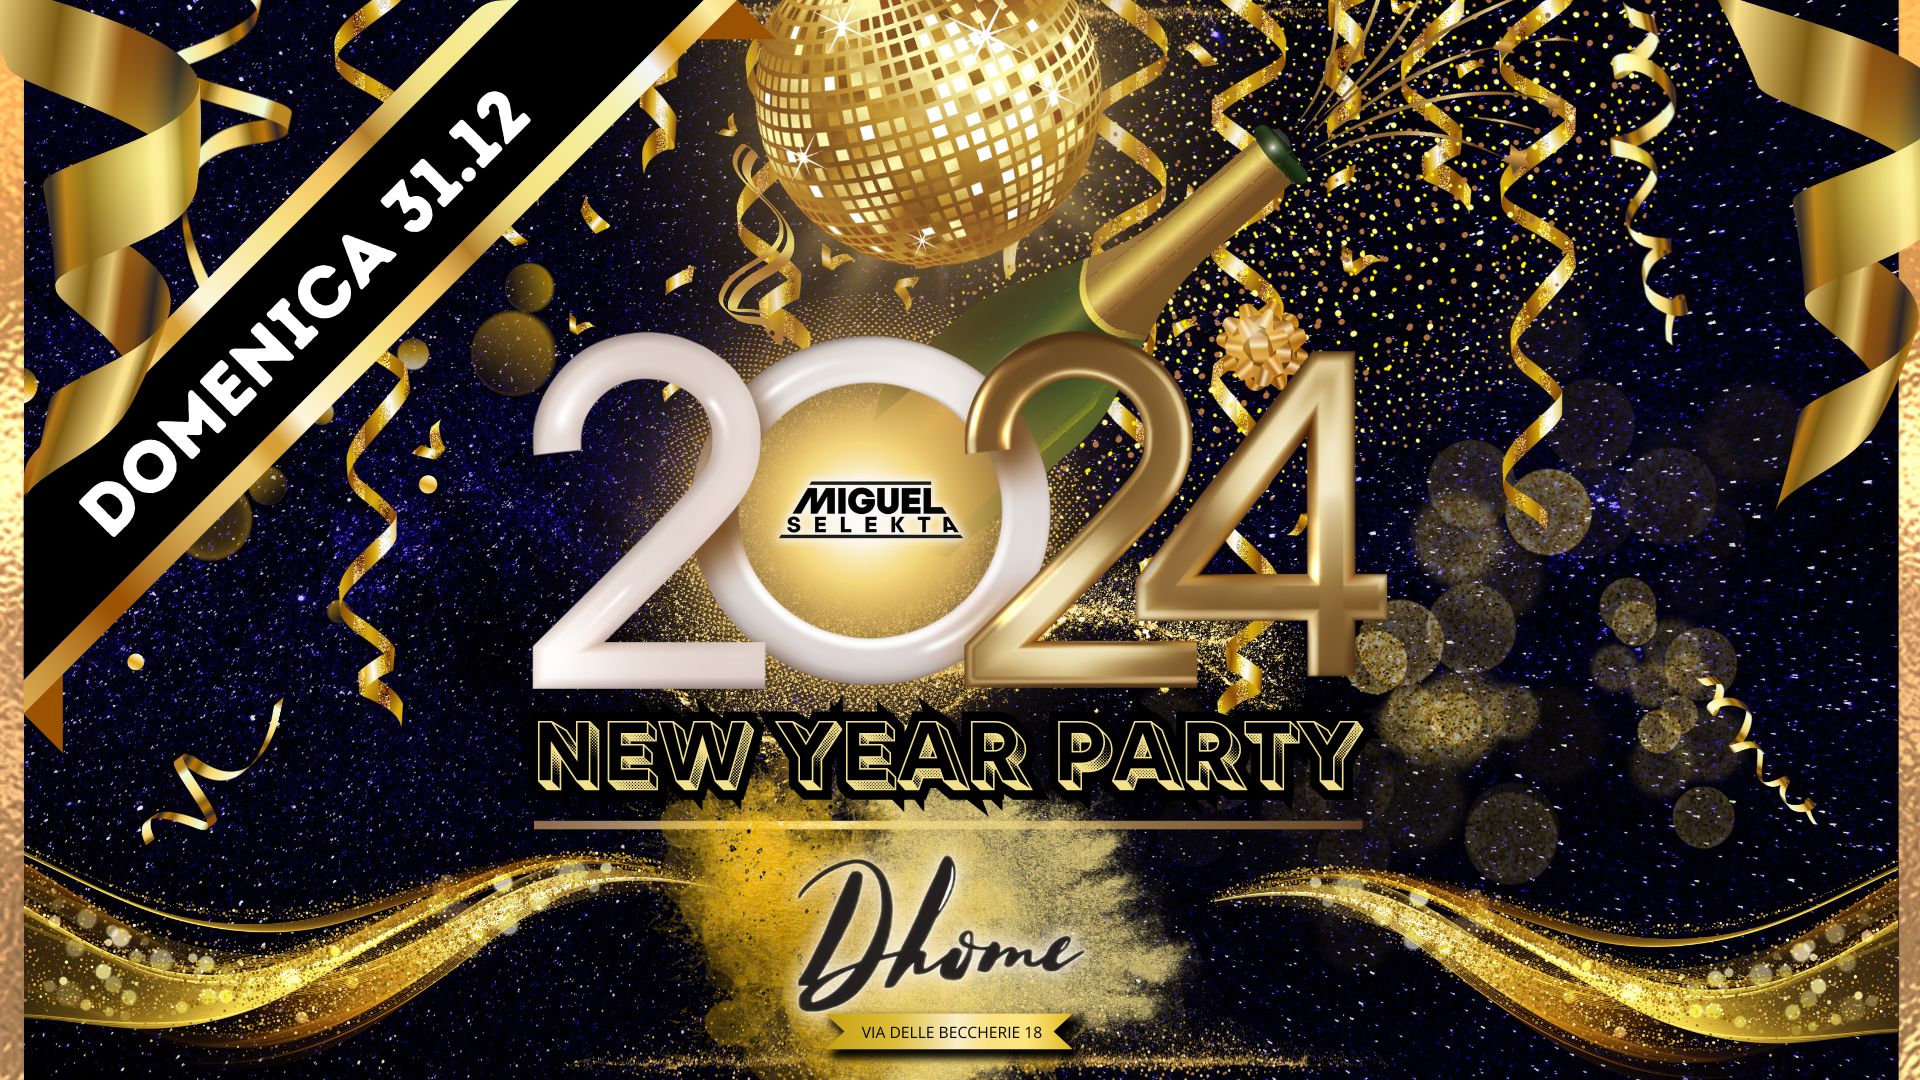 NEW YEAR PARTY 🎇 DHOME - EventiFVG.it